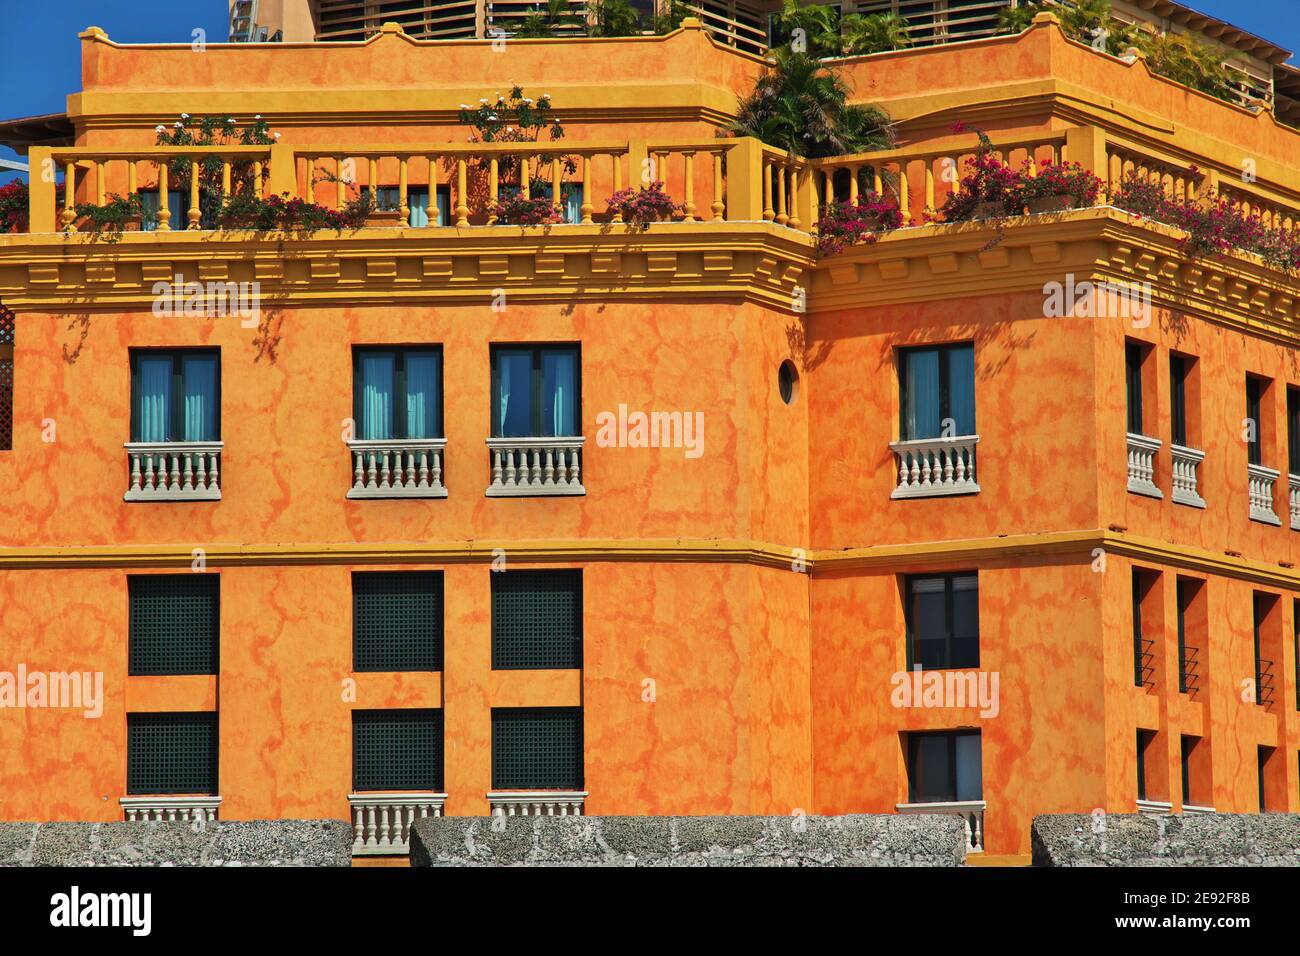 The vintage house in Cartagena, Colombia, South America Stock Photo